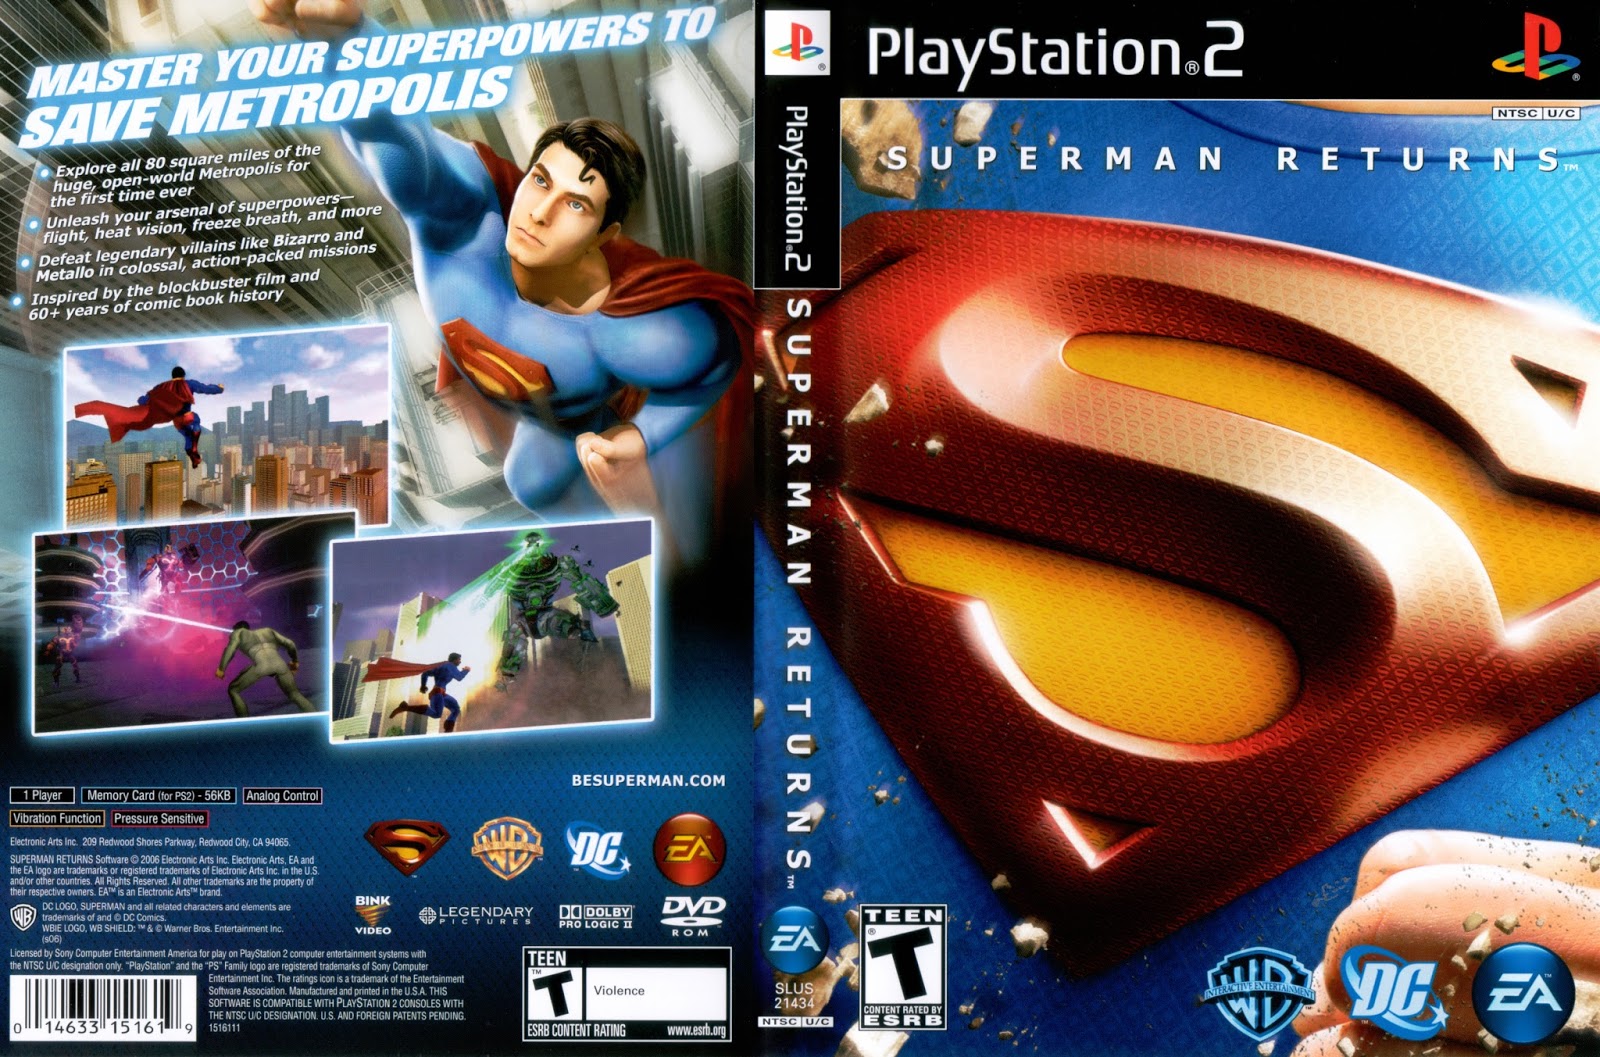 buy-ps2-superman-returns-order-only-if-you-have-modified-jail-broken-ps2-game-disc-dvd-for